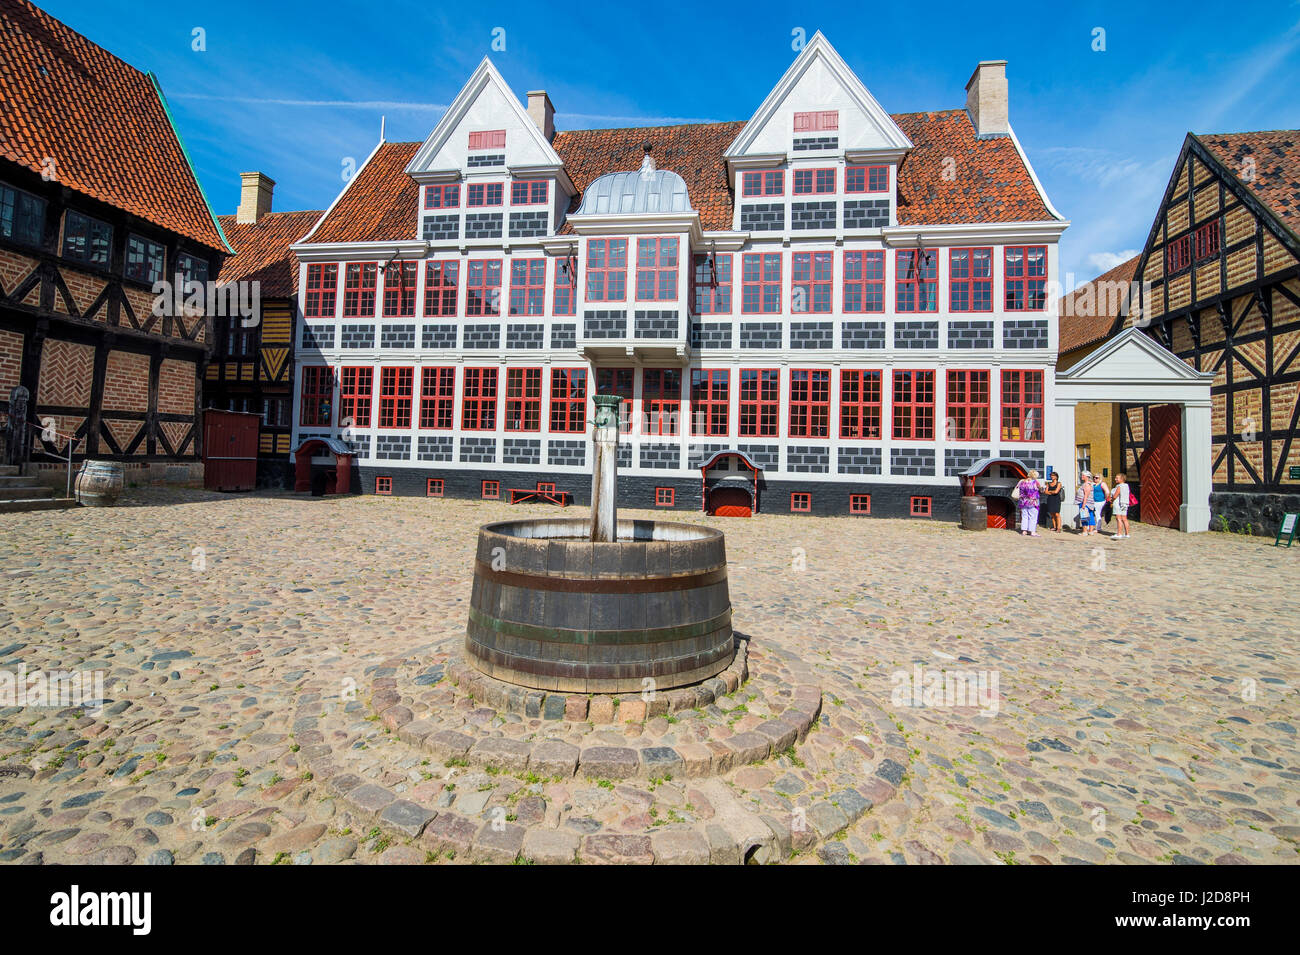 The Old Town, Den Gamle By, open air museum in Aarhus, Denmark Stock Photo